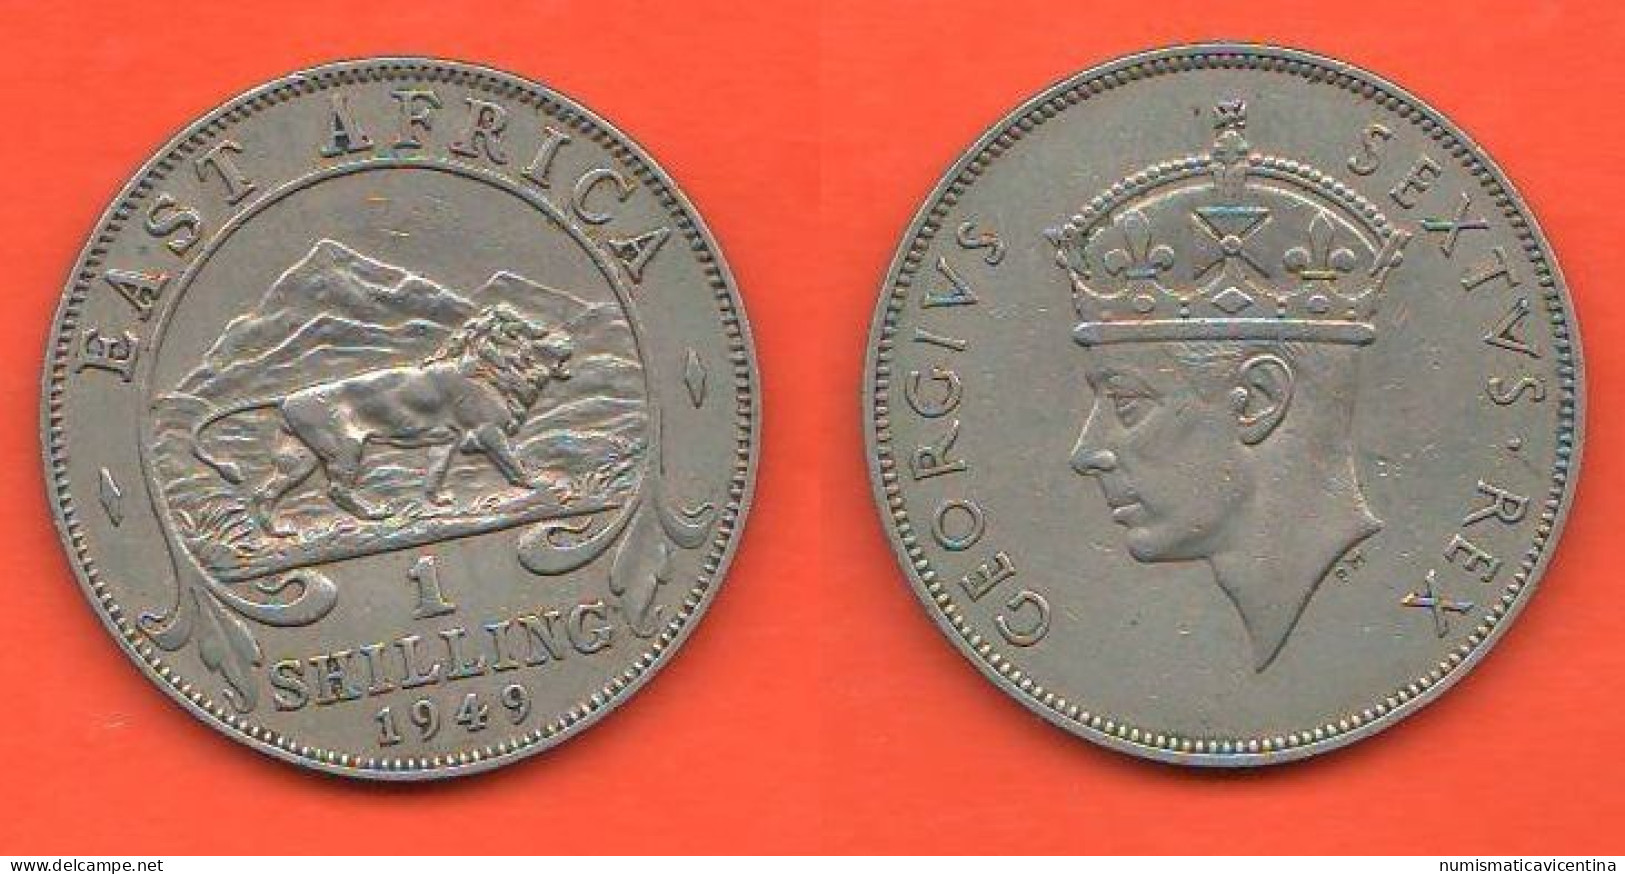 East Africa 1 Shilling 1949 Great Britain Protectorate Oriental Afrique Nickel Coin King Georgius VI° - Colonies